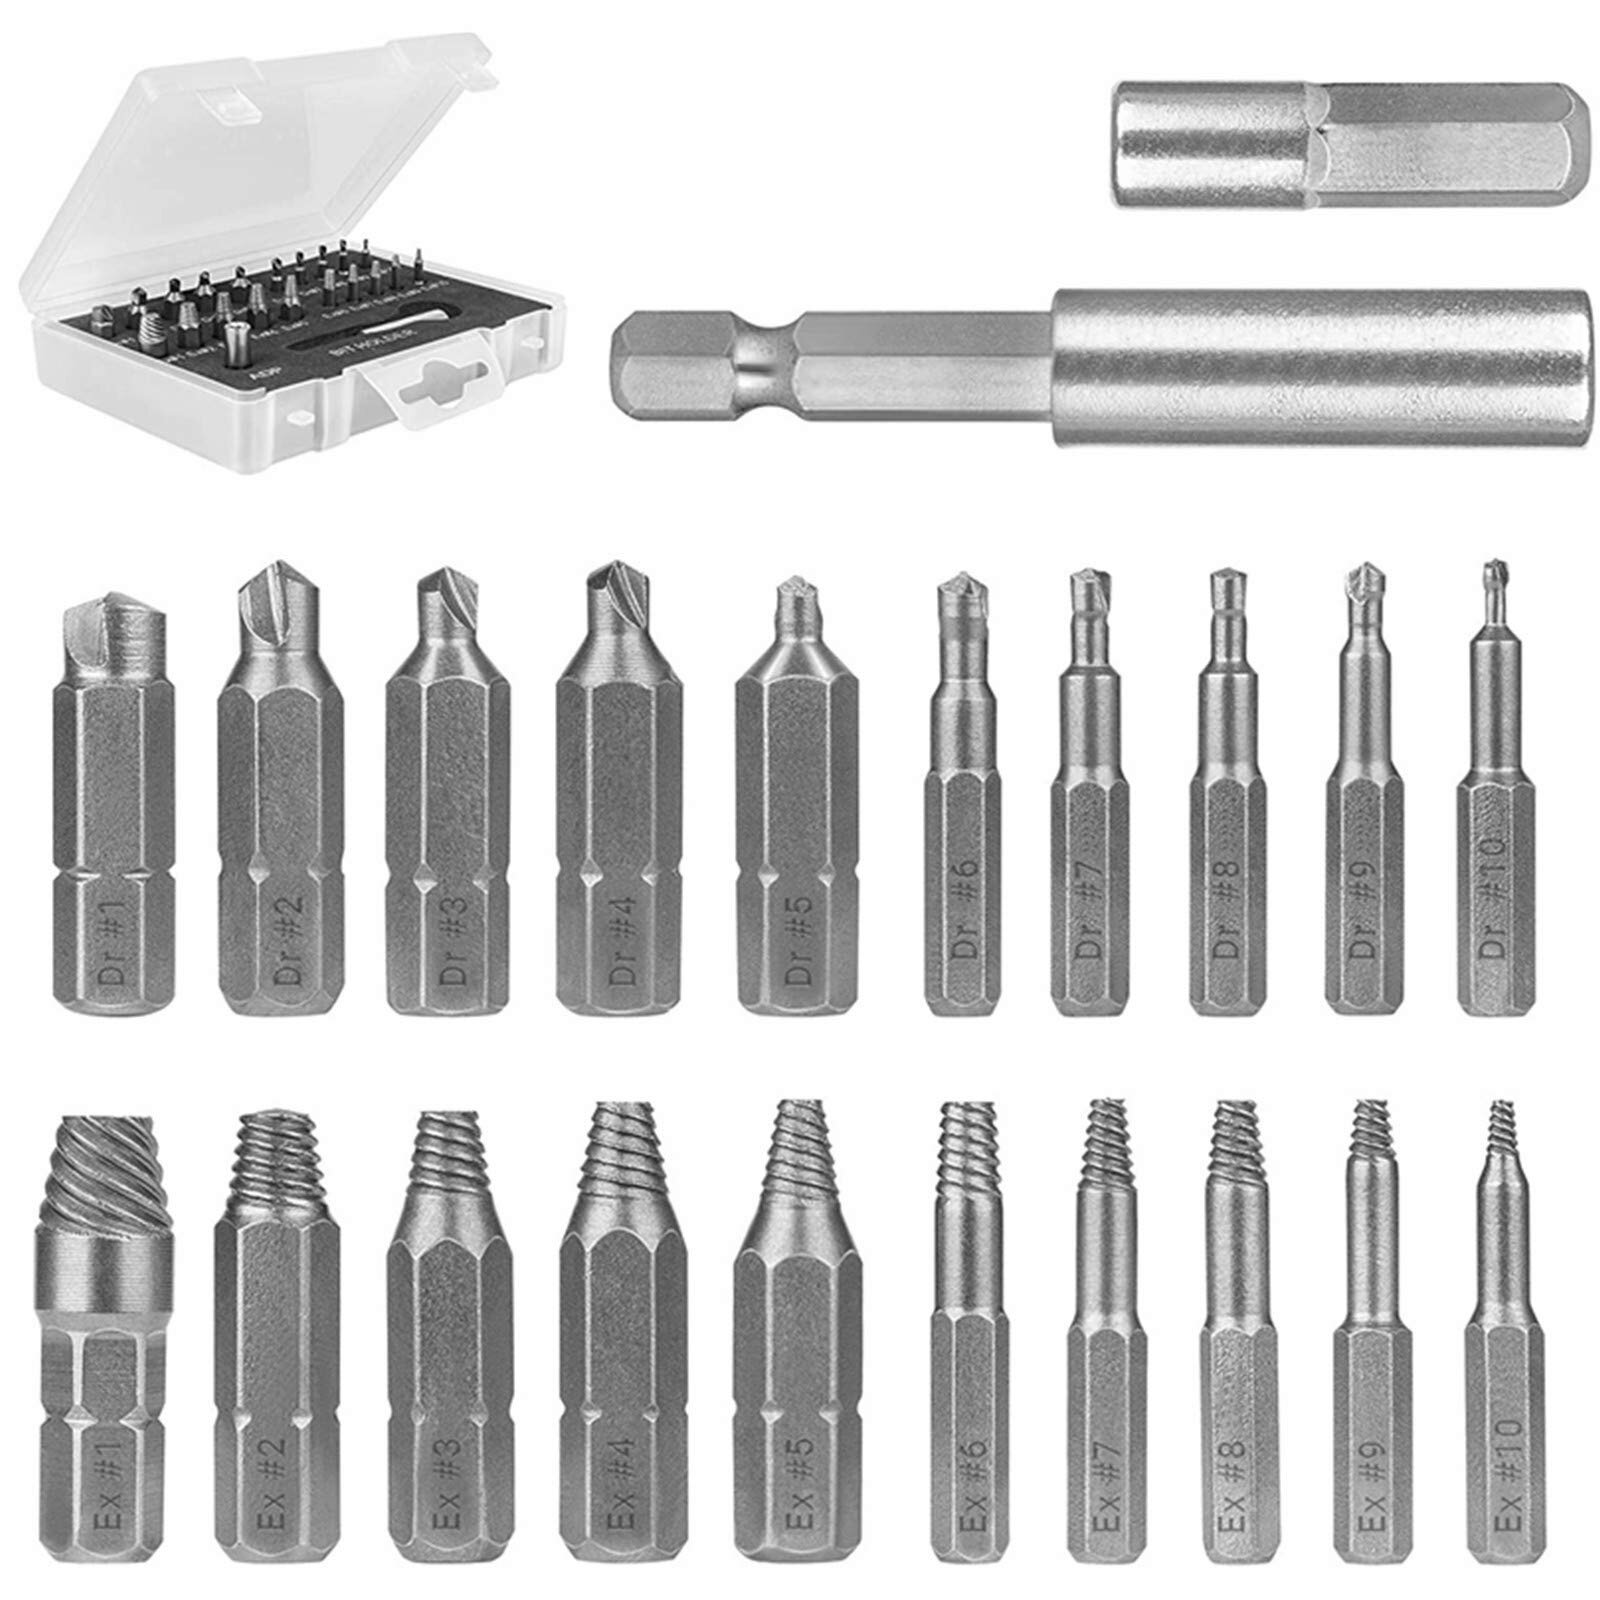 #A Screw Extractor High Speed Steel Remover Stripped Screw Use for Industrial Screw and Bolt Removal Stripped Screw Tap